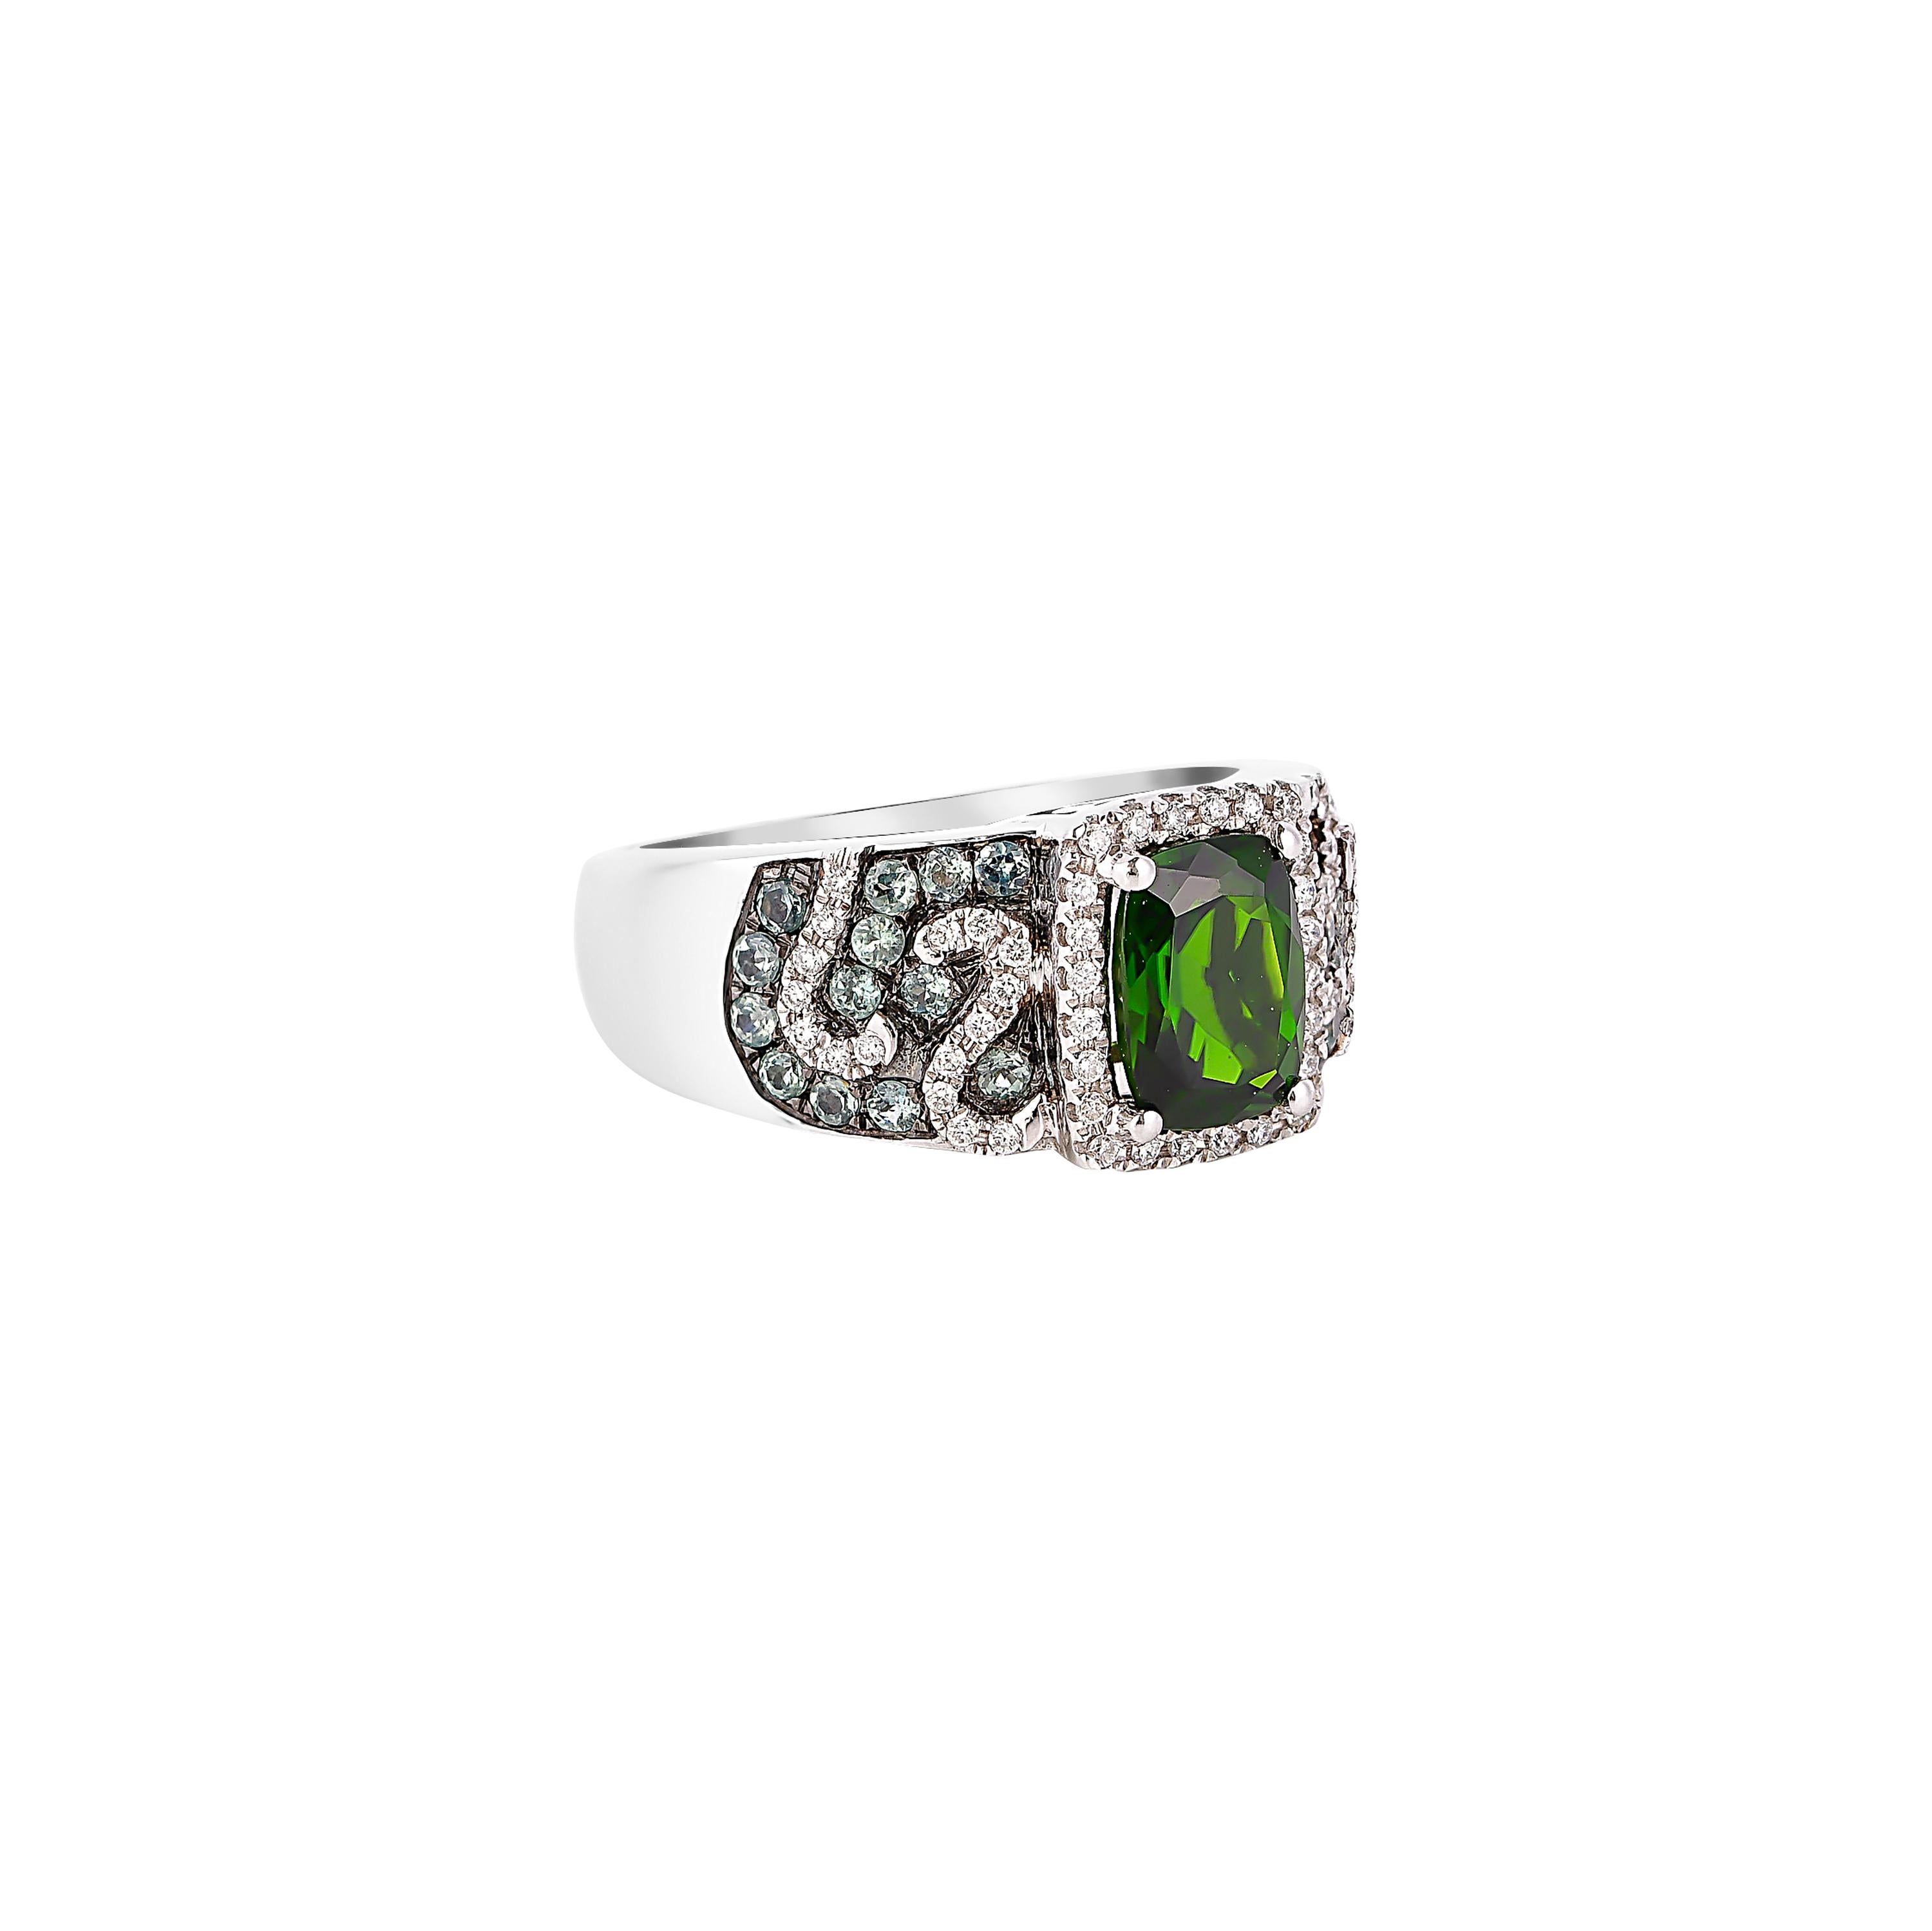 Unique and Designer Cocktail Rings by Sunita Nahata Fine Design.

Classic Chrome Diopside ring in 14K White gold with Alexandrite and diamonds. 

Chrome Diopside: 1.50 carat, 6X8mm size, Cushion shape.
Alexandrite: 0.704 carat, 1.50mm size, round